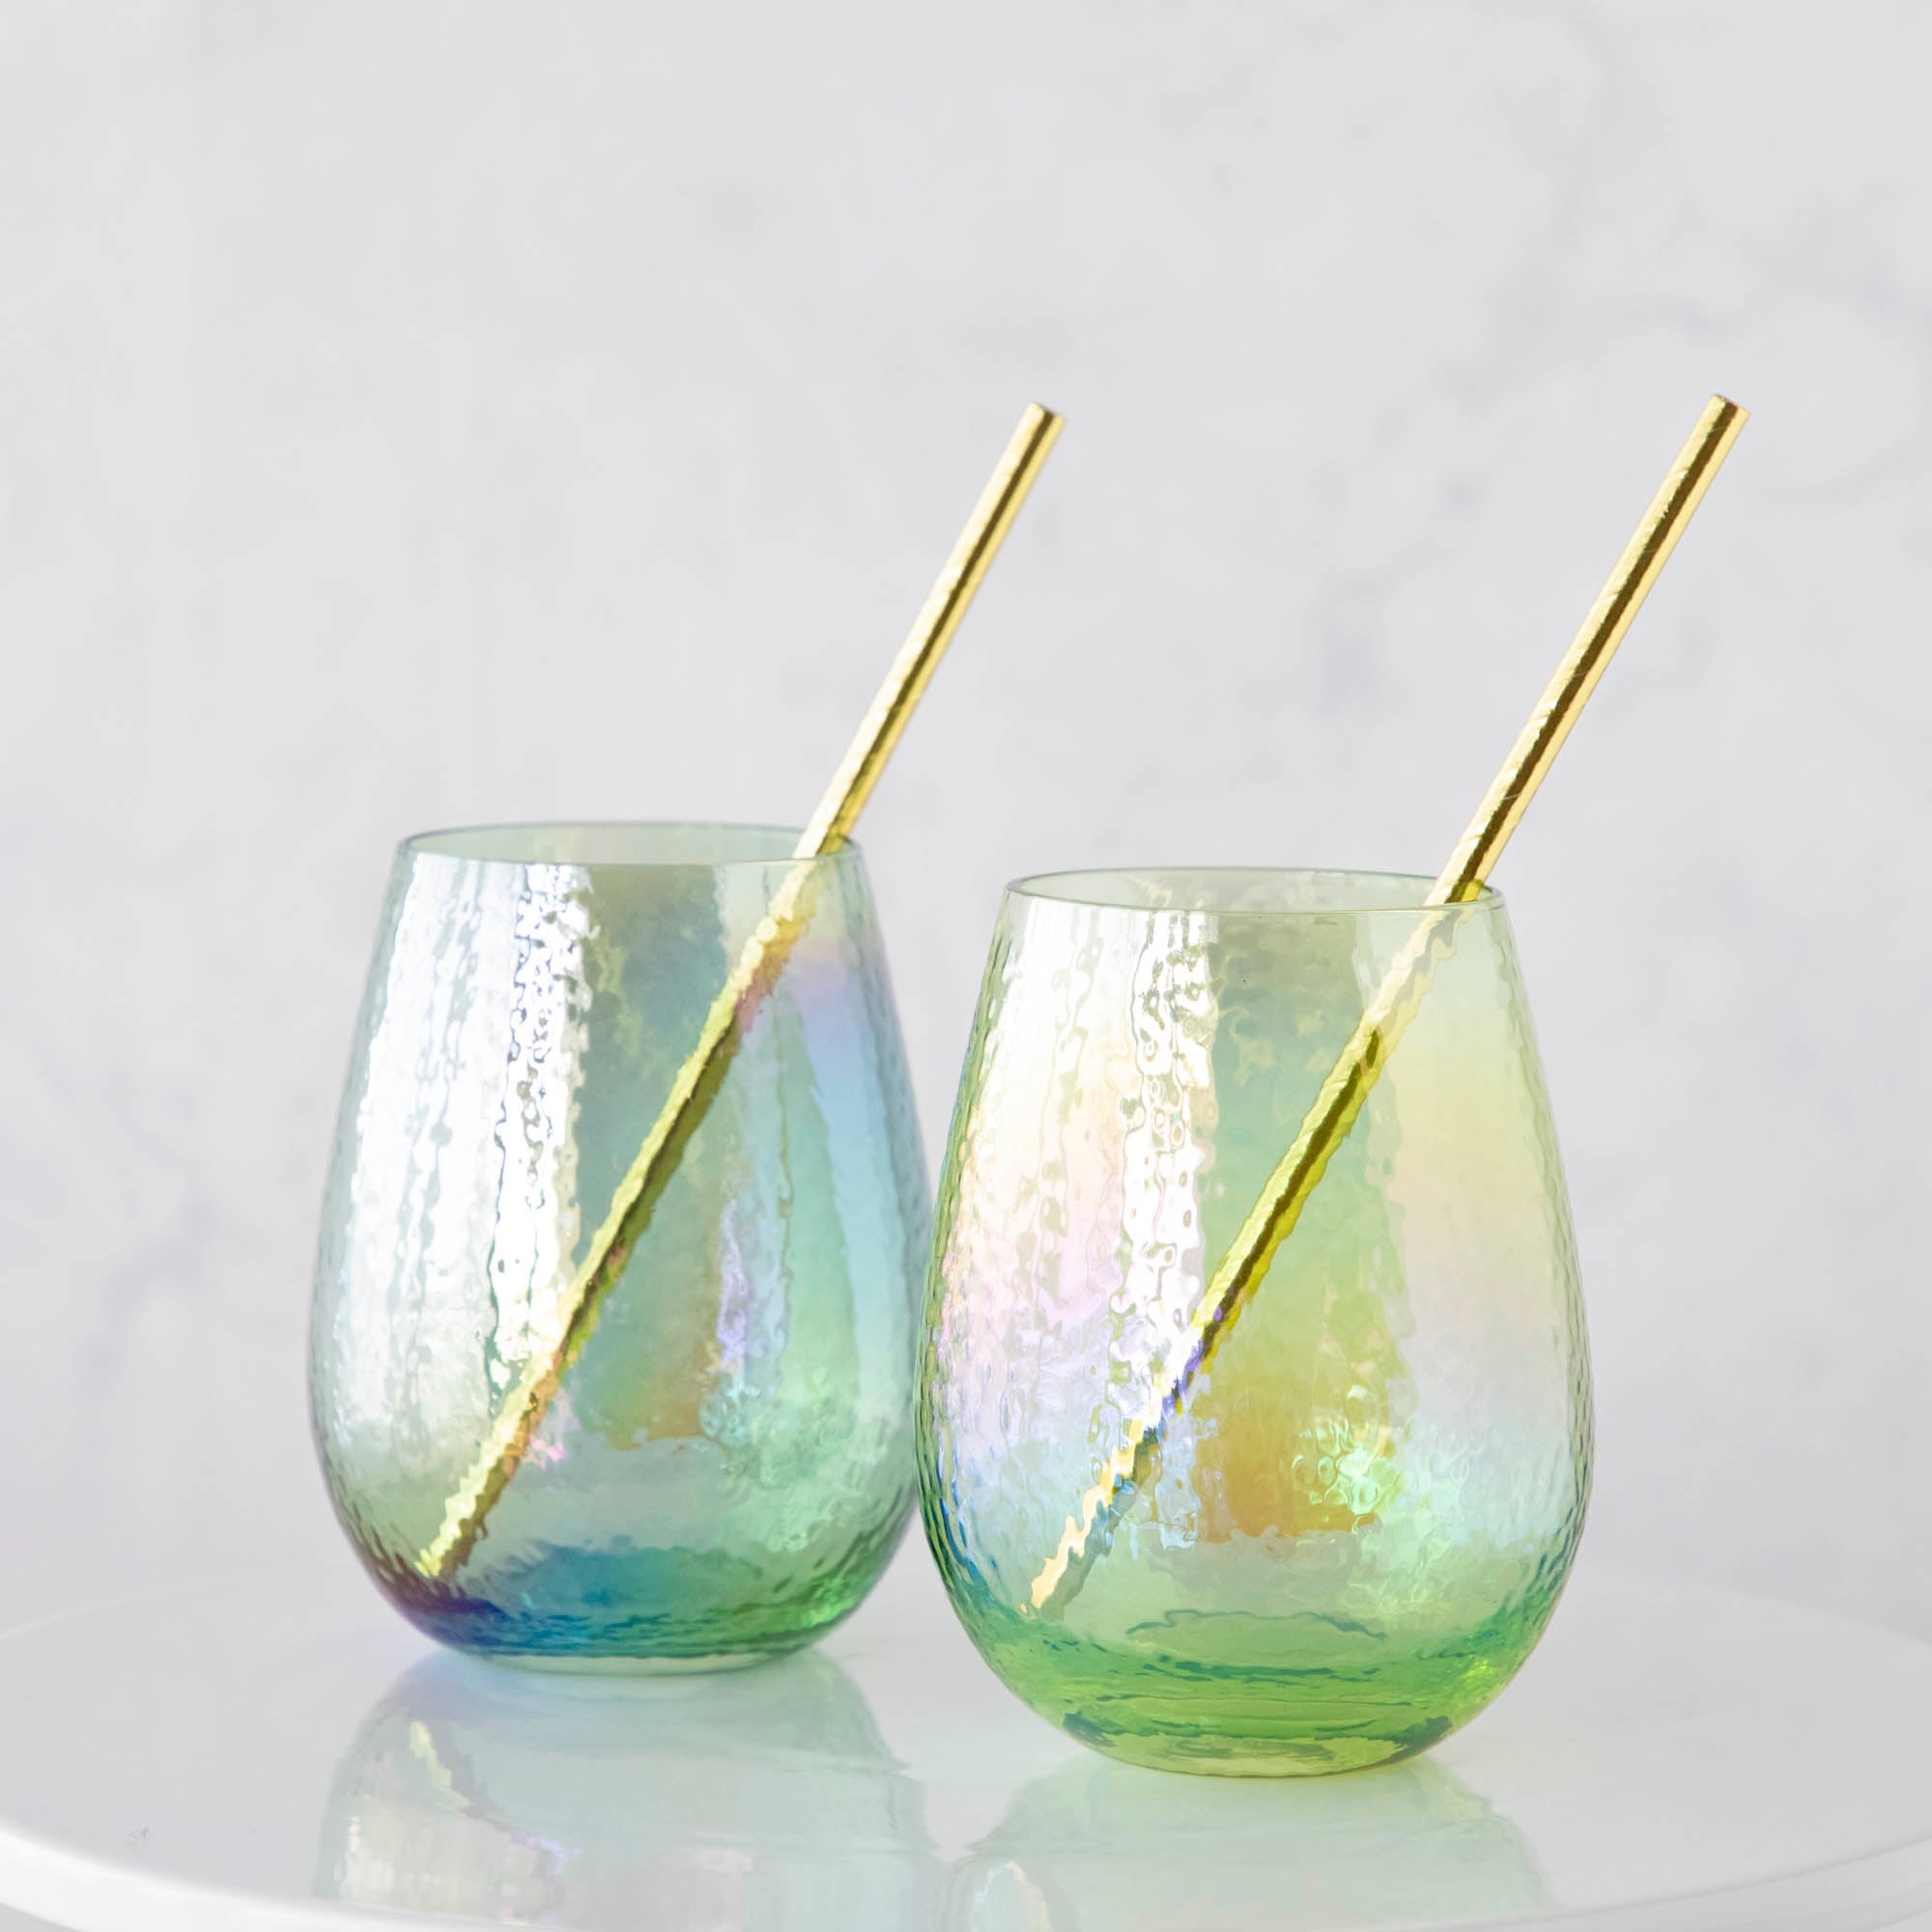 Two Luster Stemless Glasses with gold straws sitting on a white table in a cozy home, ready to serve your favorite drink.